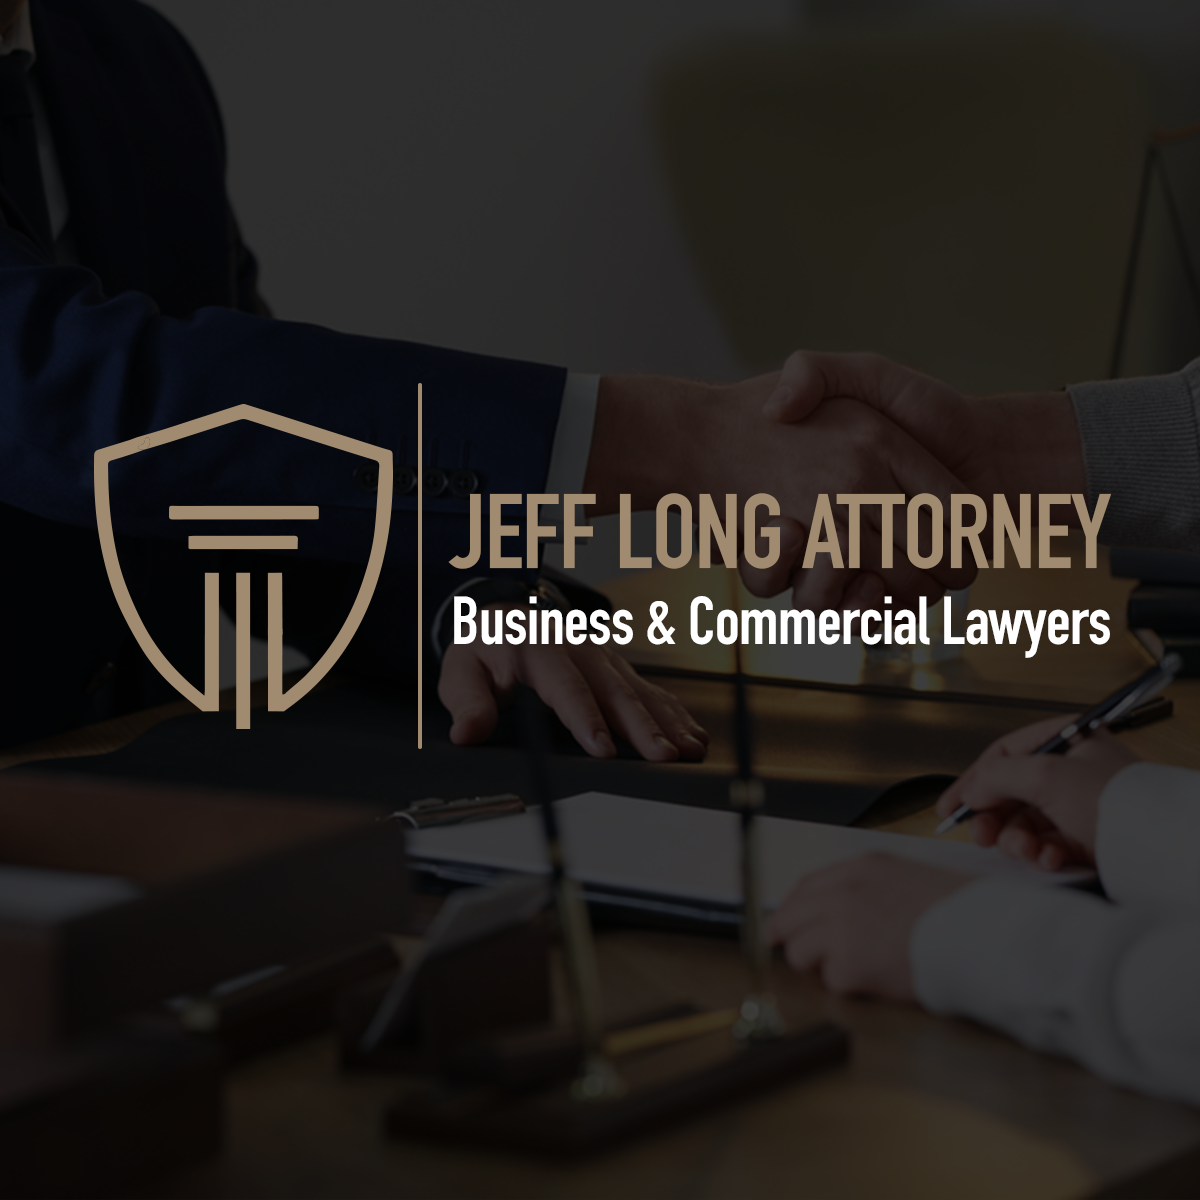 Jeff Long Attorney Firm: Business and Commercial Lawyers's Logo